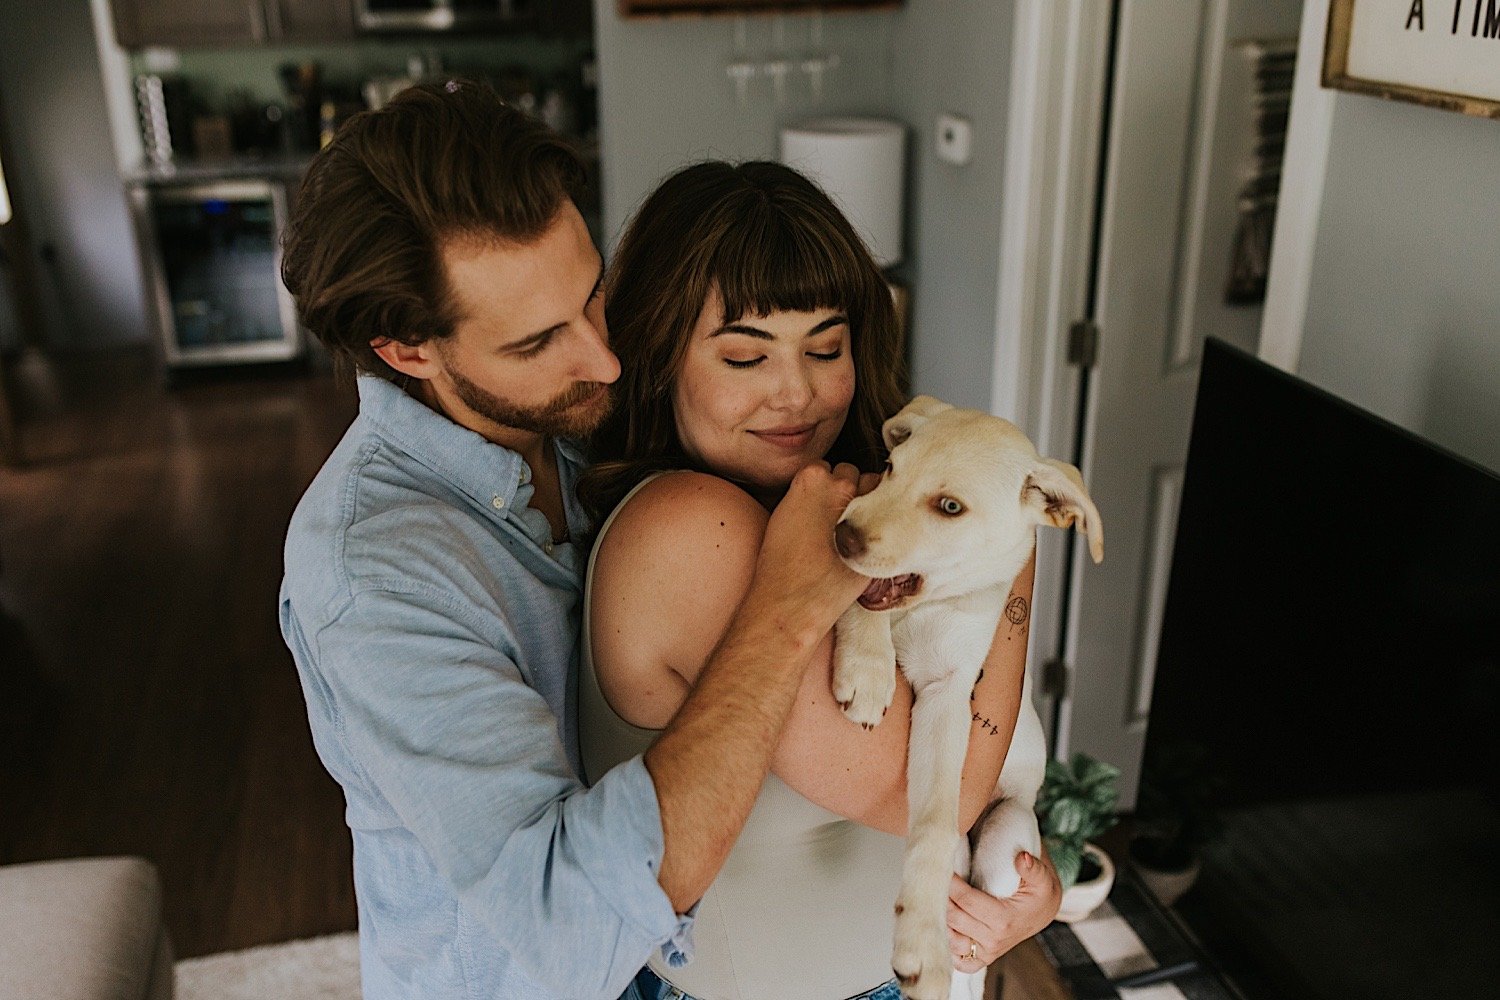 A wife holds her puppy while her husband stands behind her hugging them both.